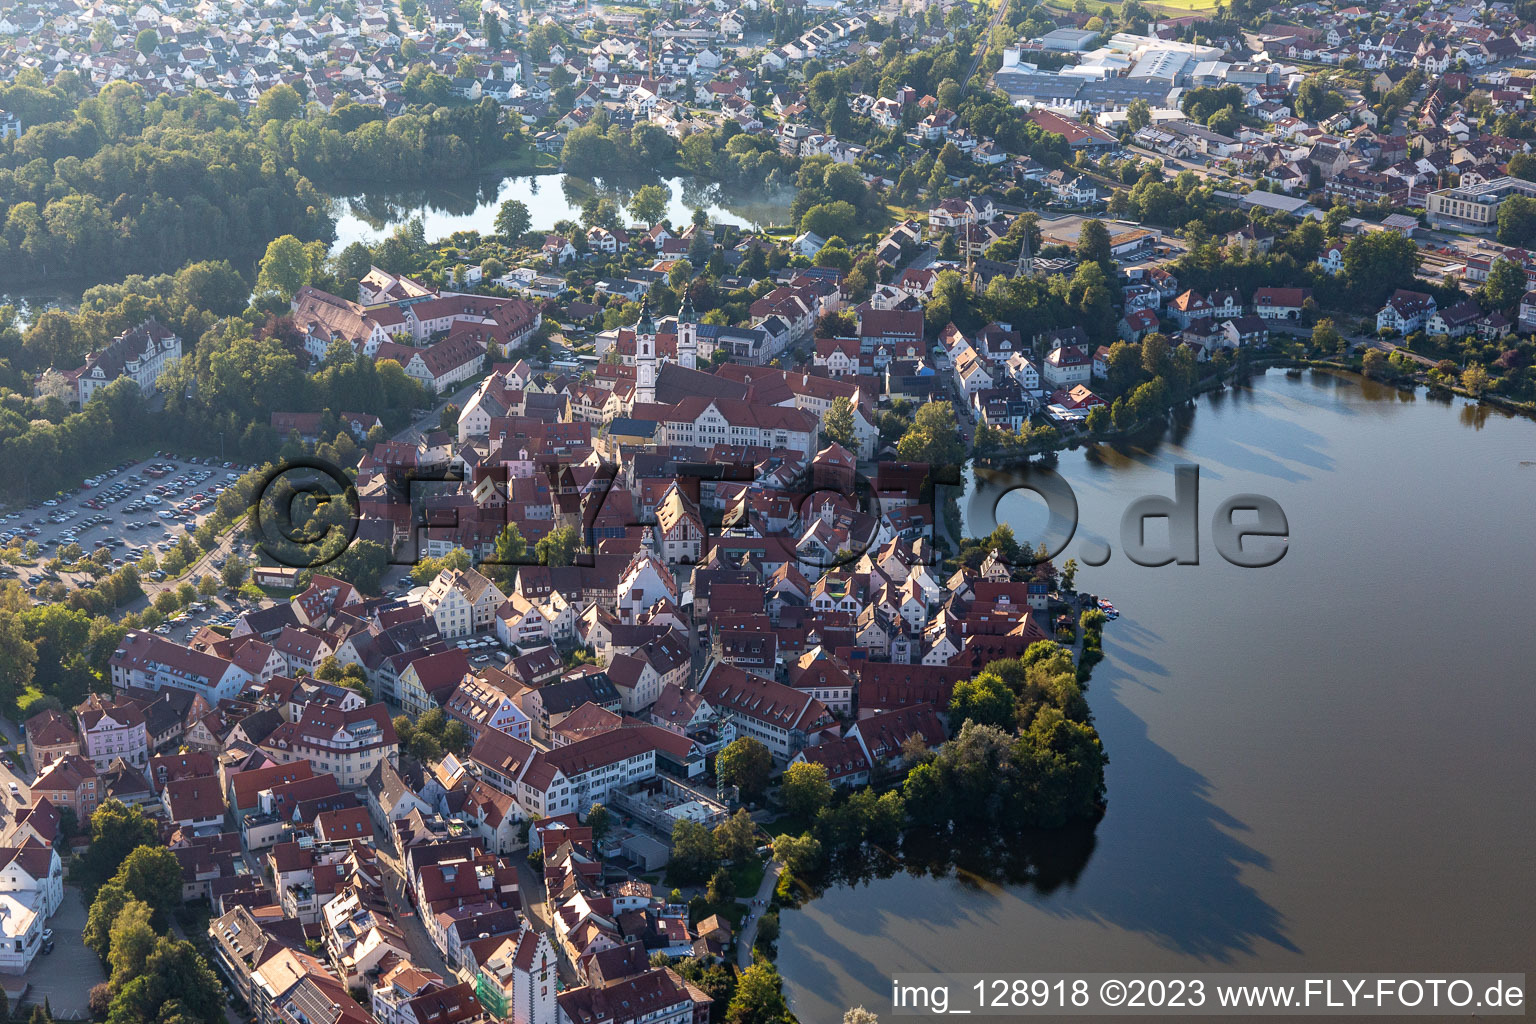 City view of the downtown area on the shore areas of Stadt See in Bad Waldsee in the state Baden-Wuerttemberg, Germany